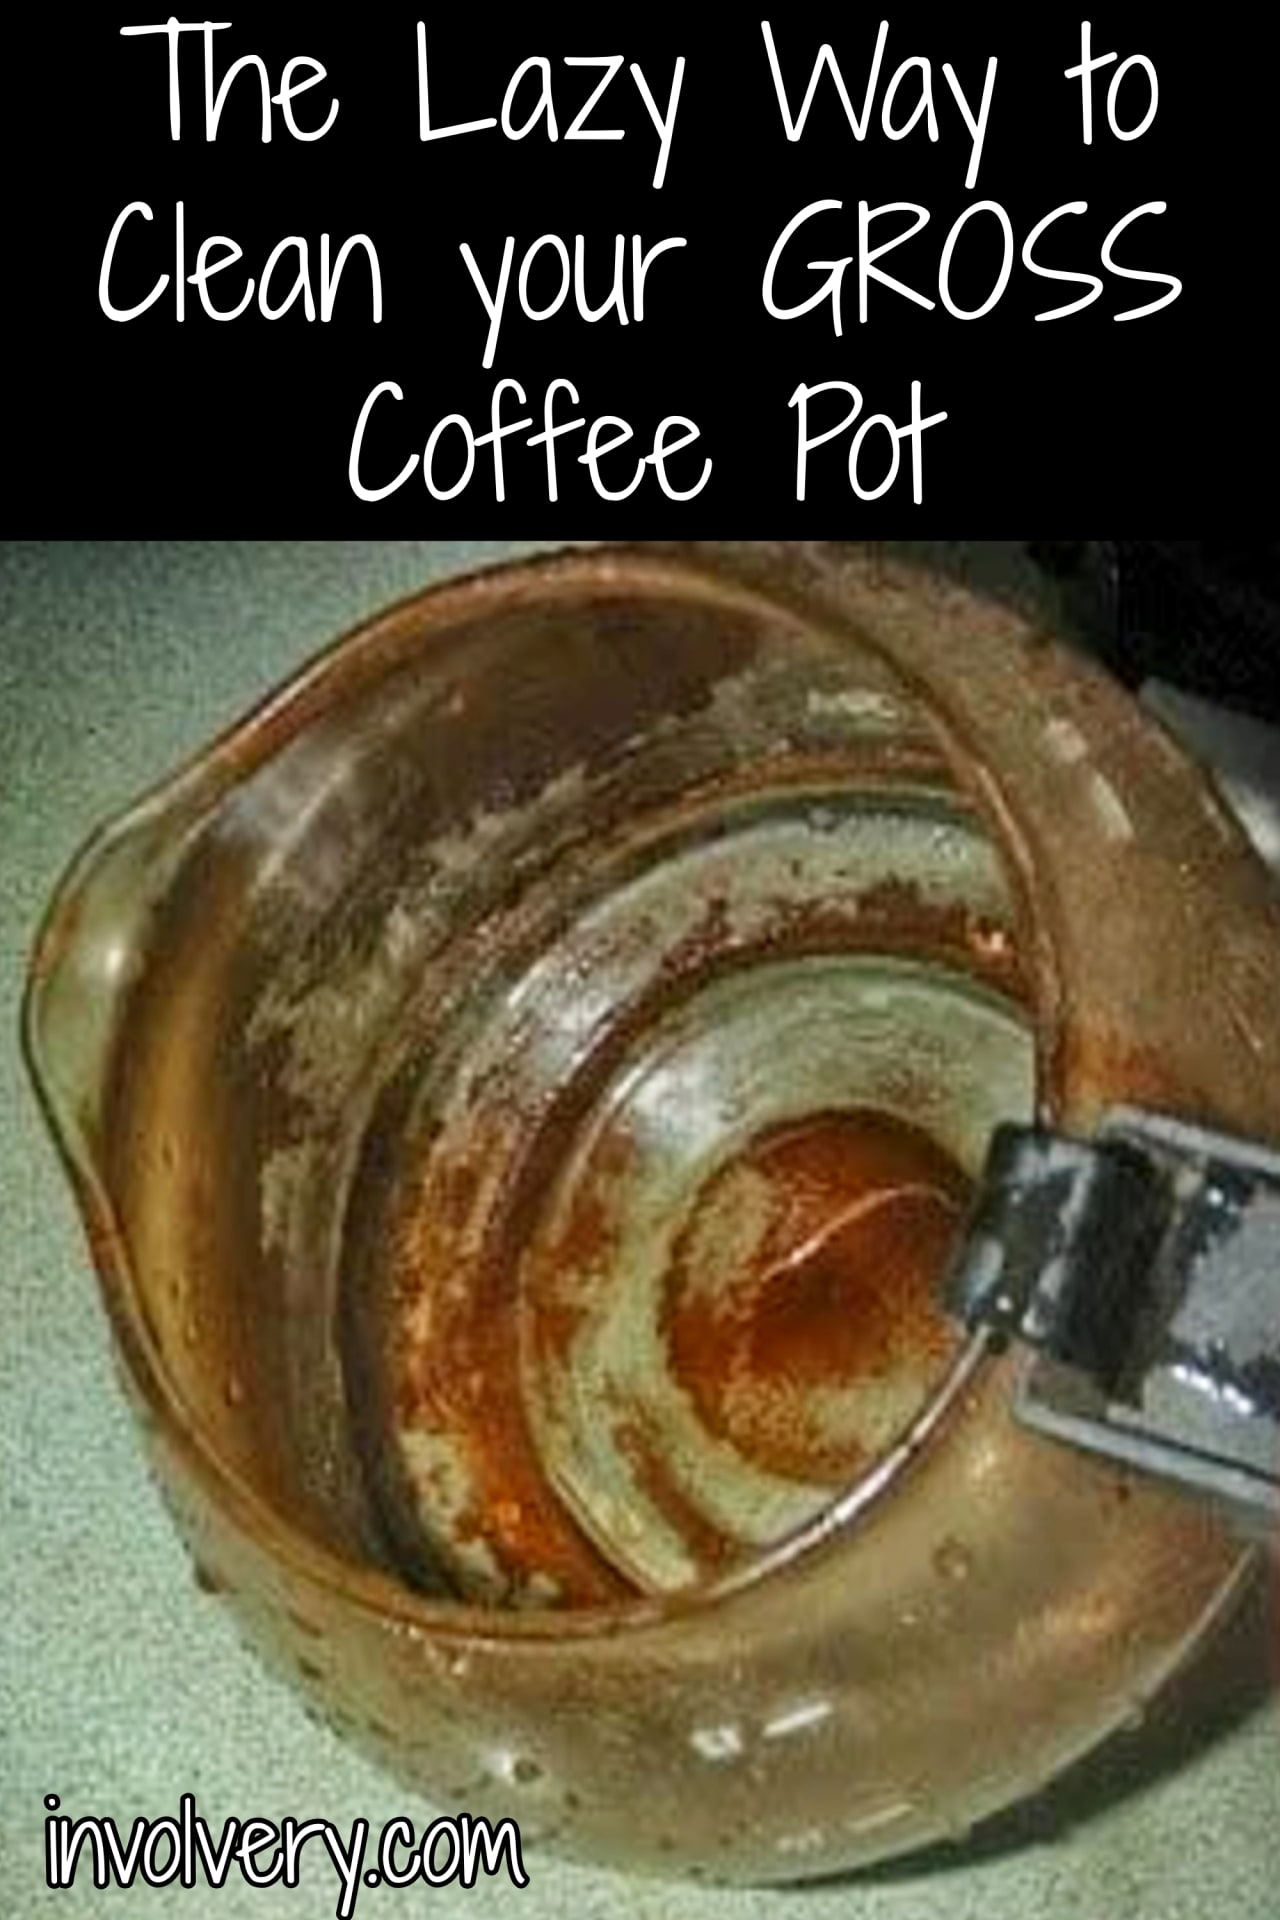 kitchen cleaning hacks - Lazy cleaning hacks for your kitchen - how to easily clean your gross coffee pot the LAZY way